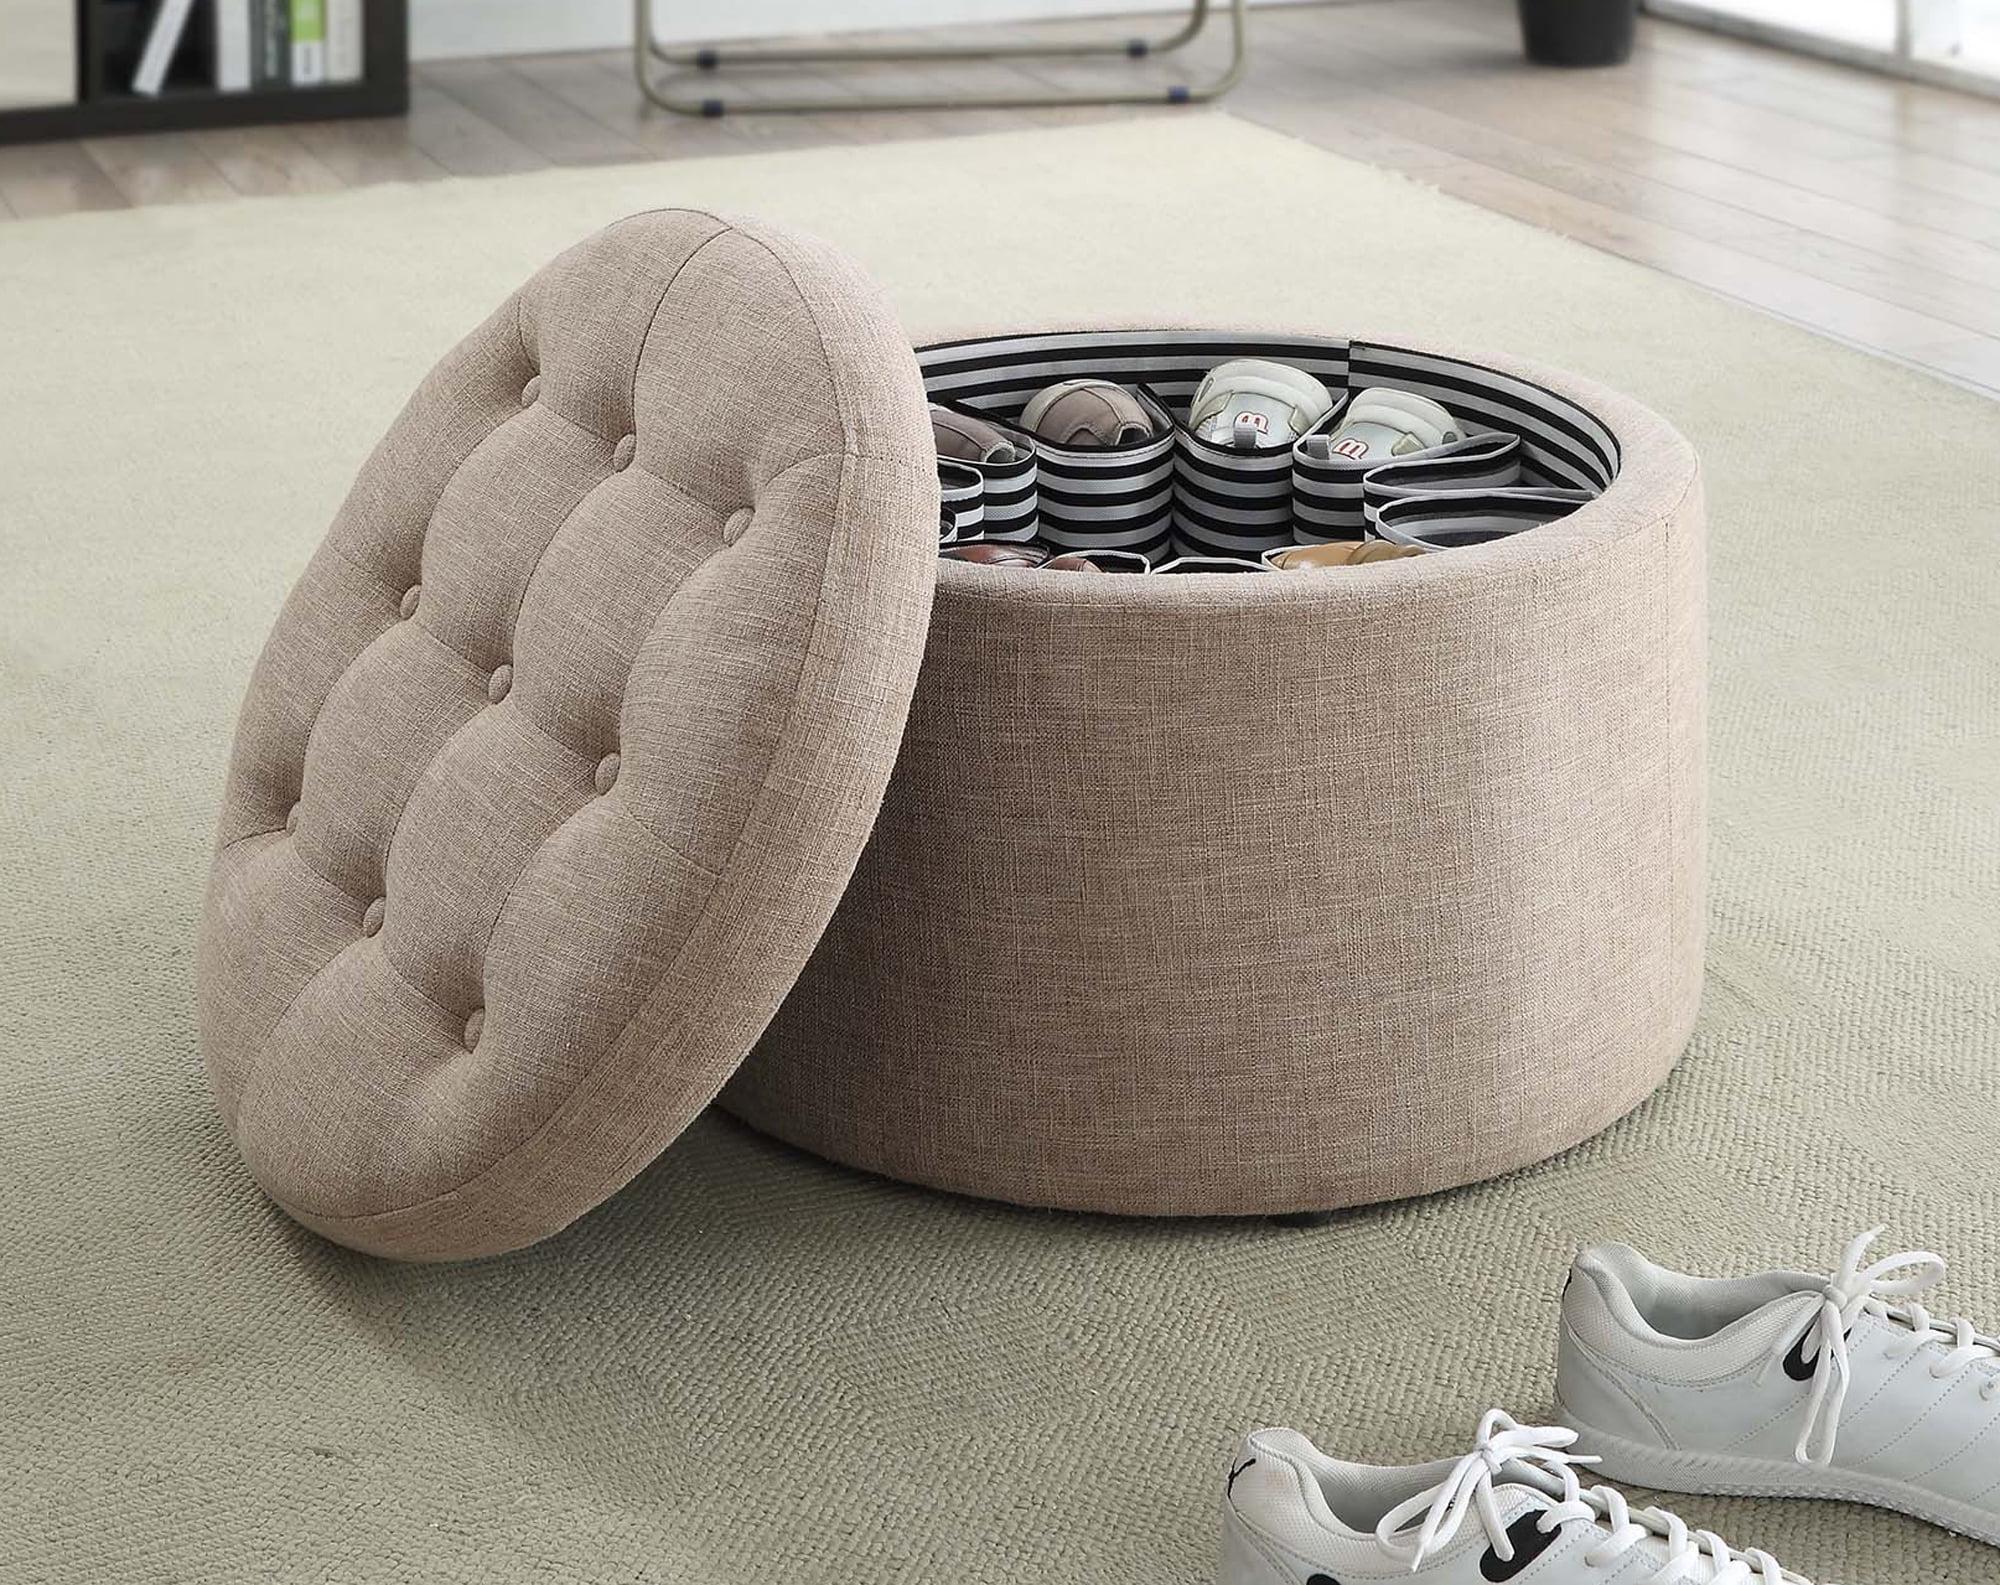 Beige Tufted Round Ottoman with Shoe Storage Compartments